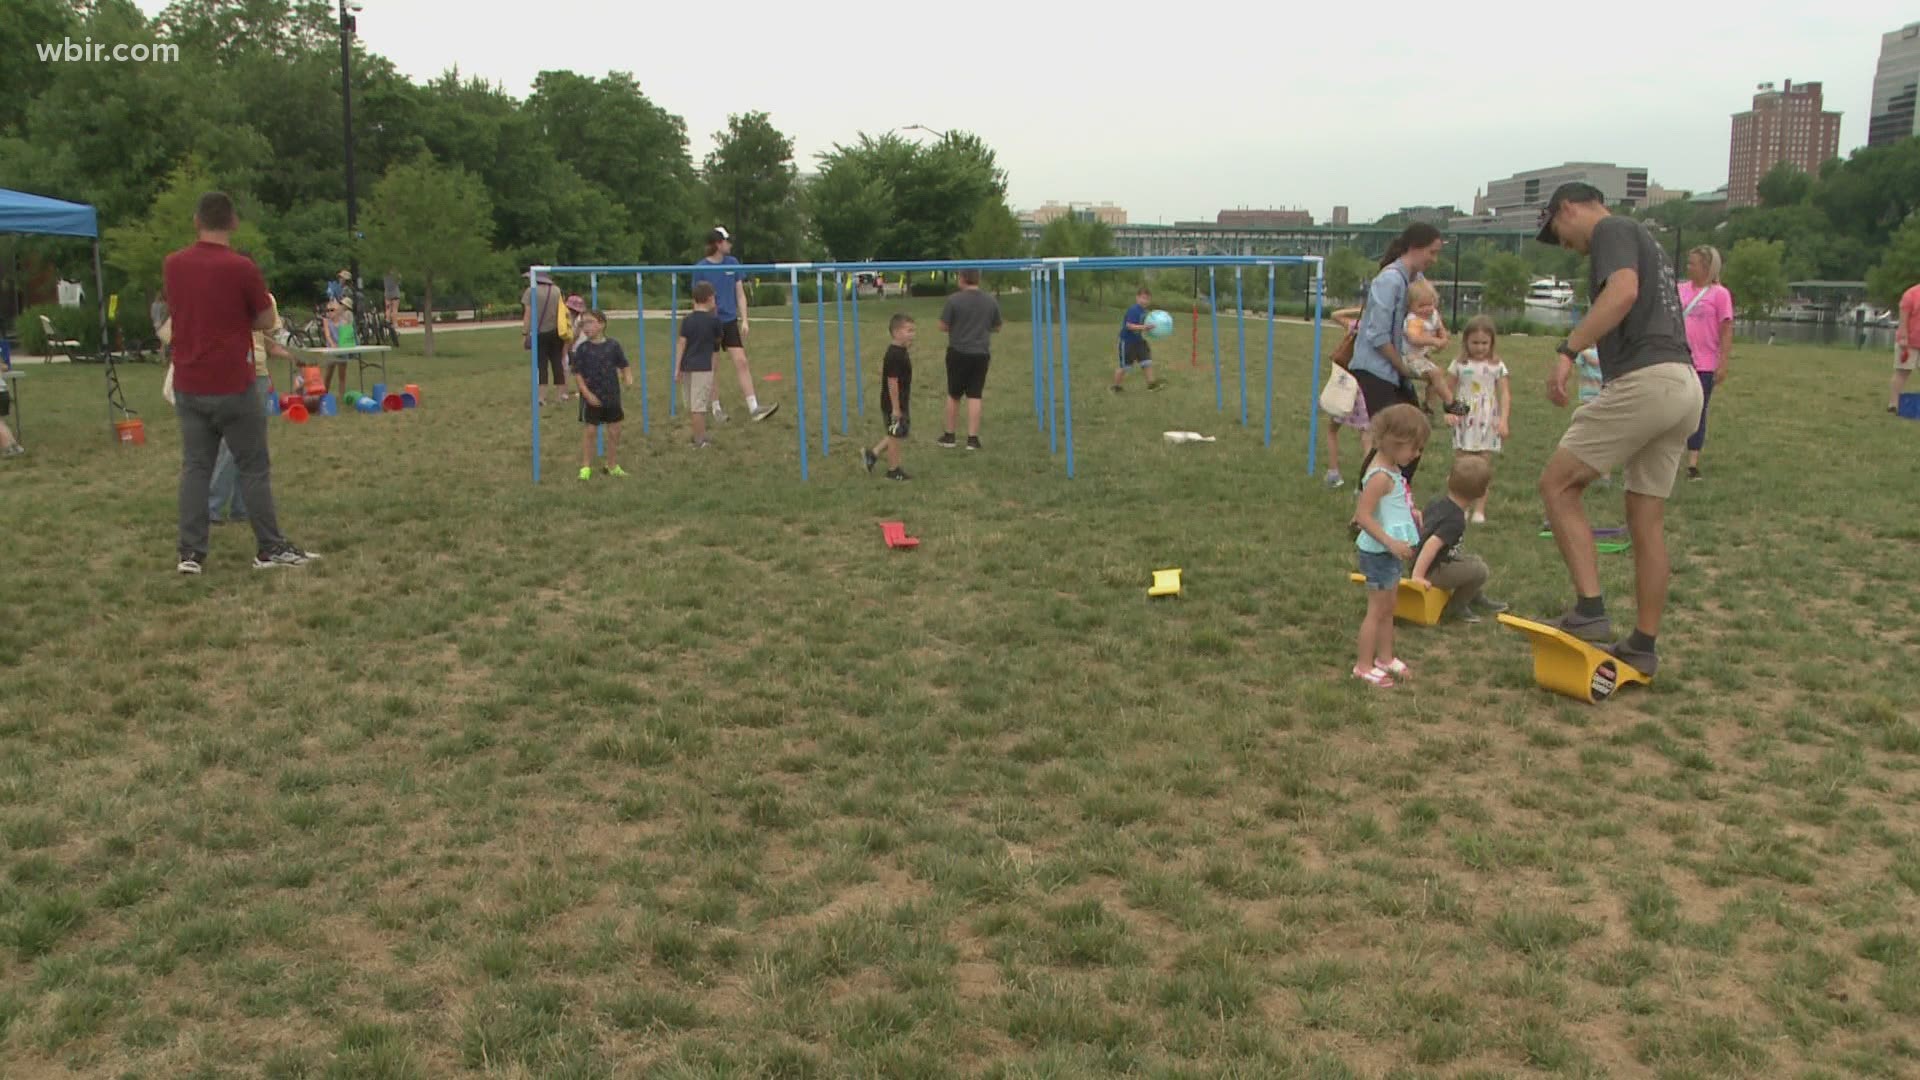 The city of Knoxville is hosting Kid a-riffic fun events every Wednesday in June and July at eight different city parks.